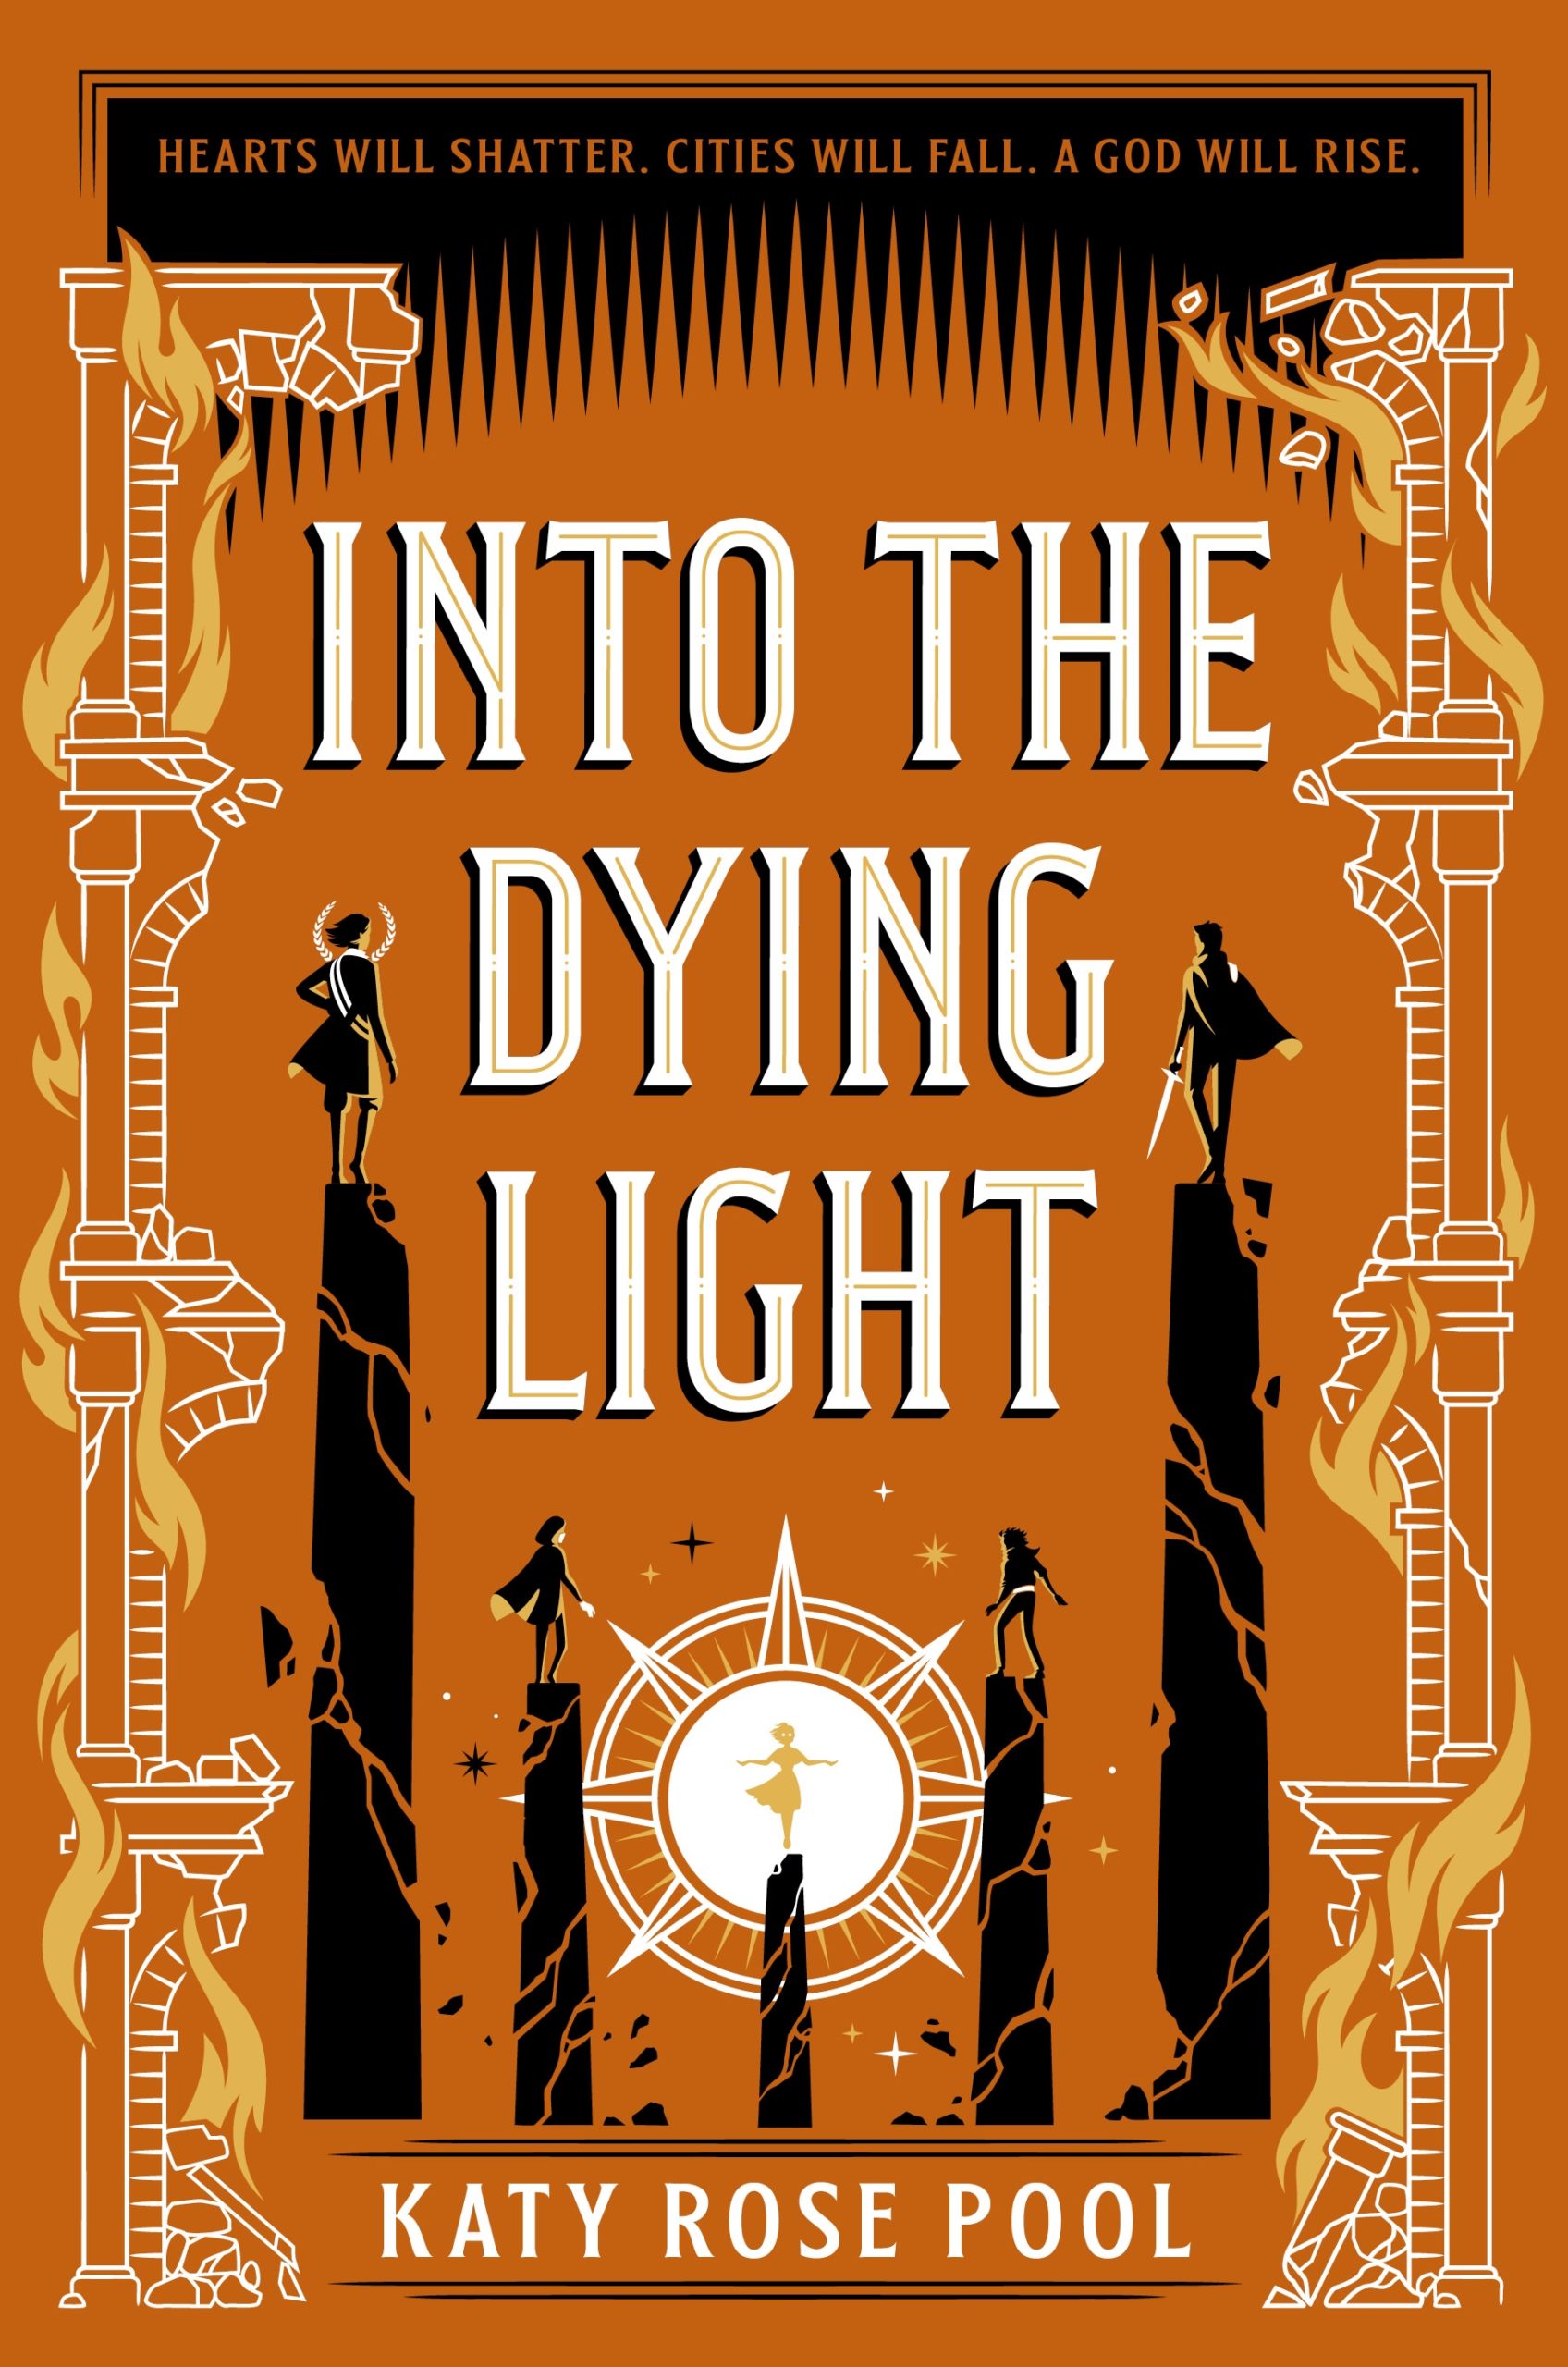 Book Into the Dying Light